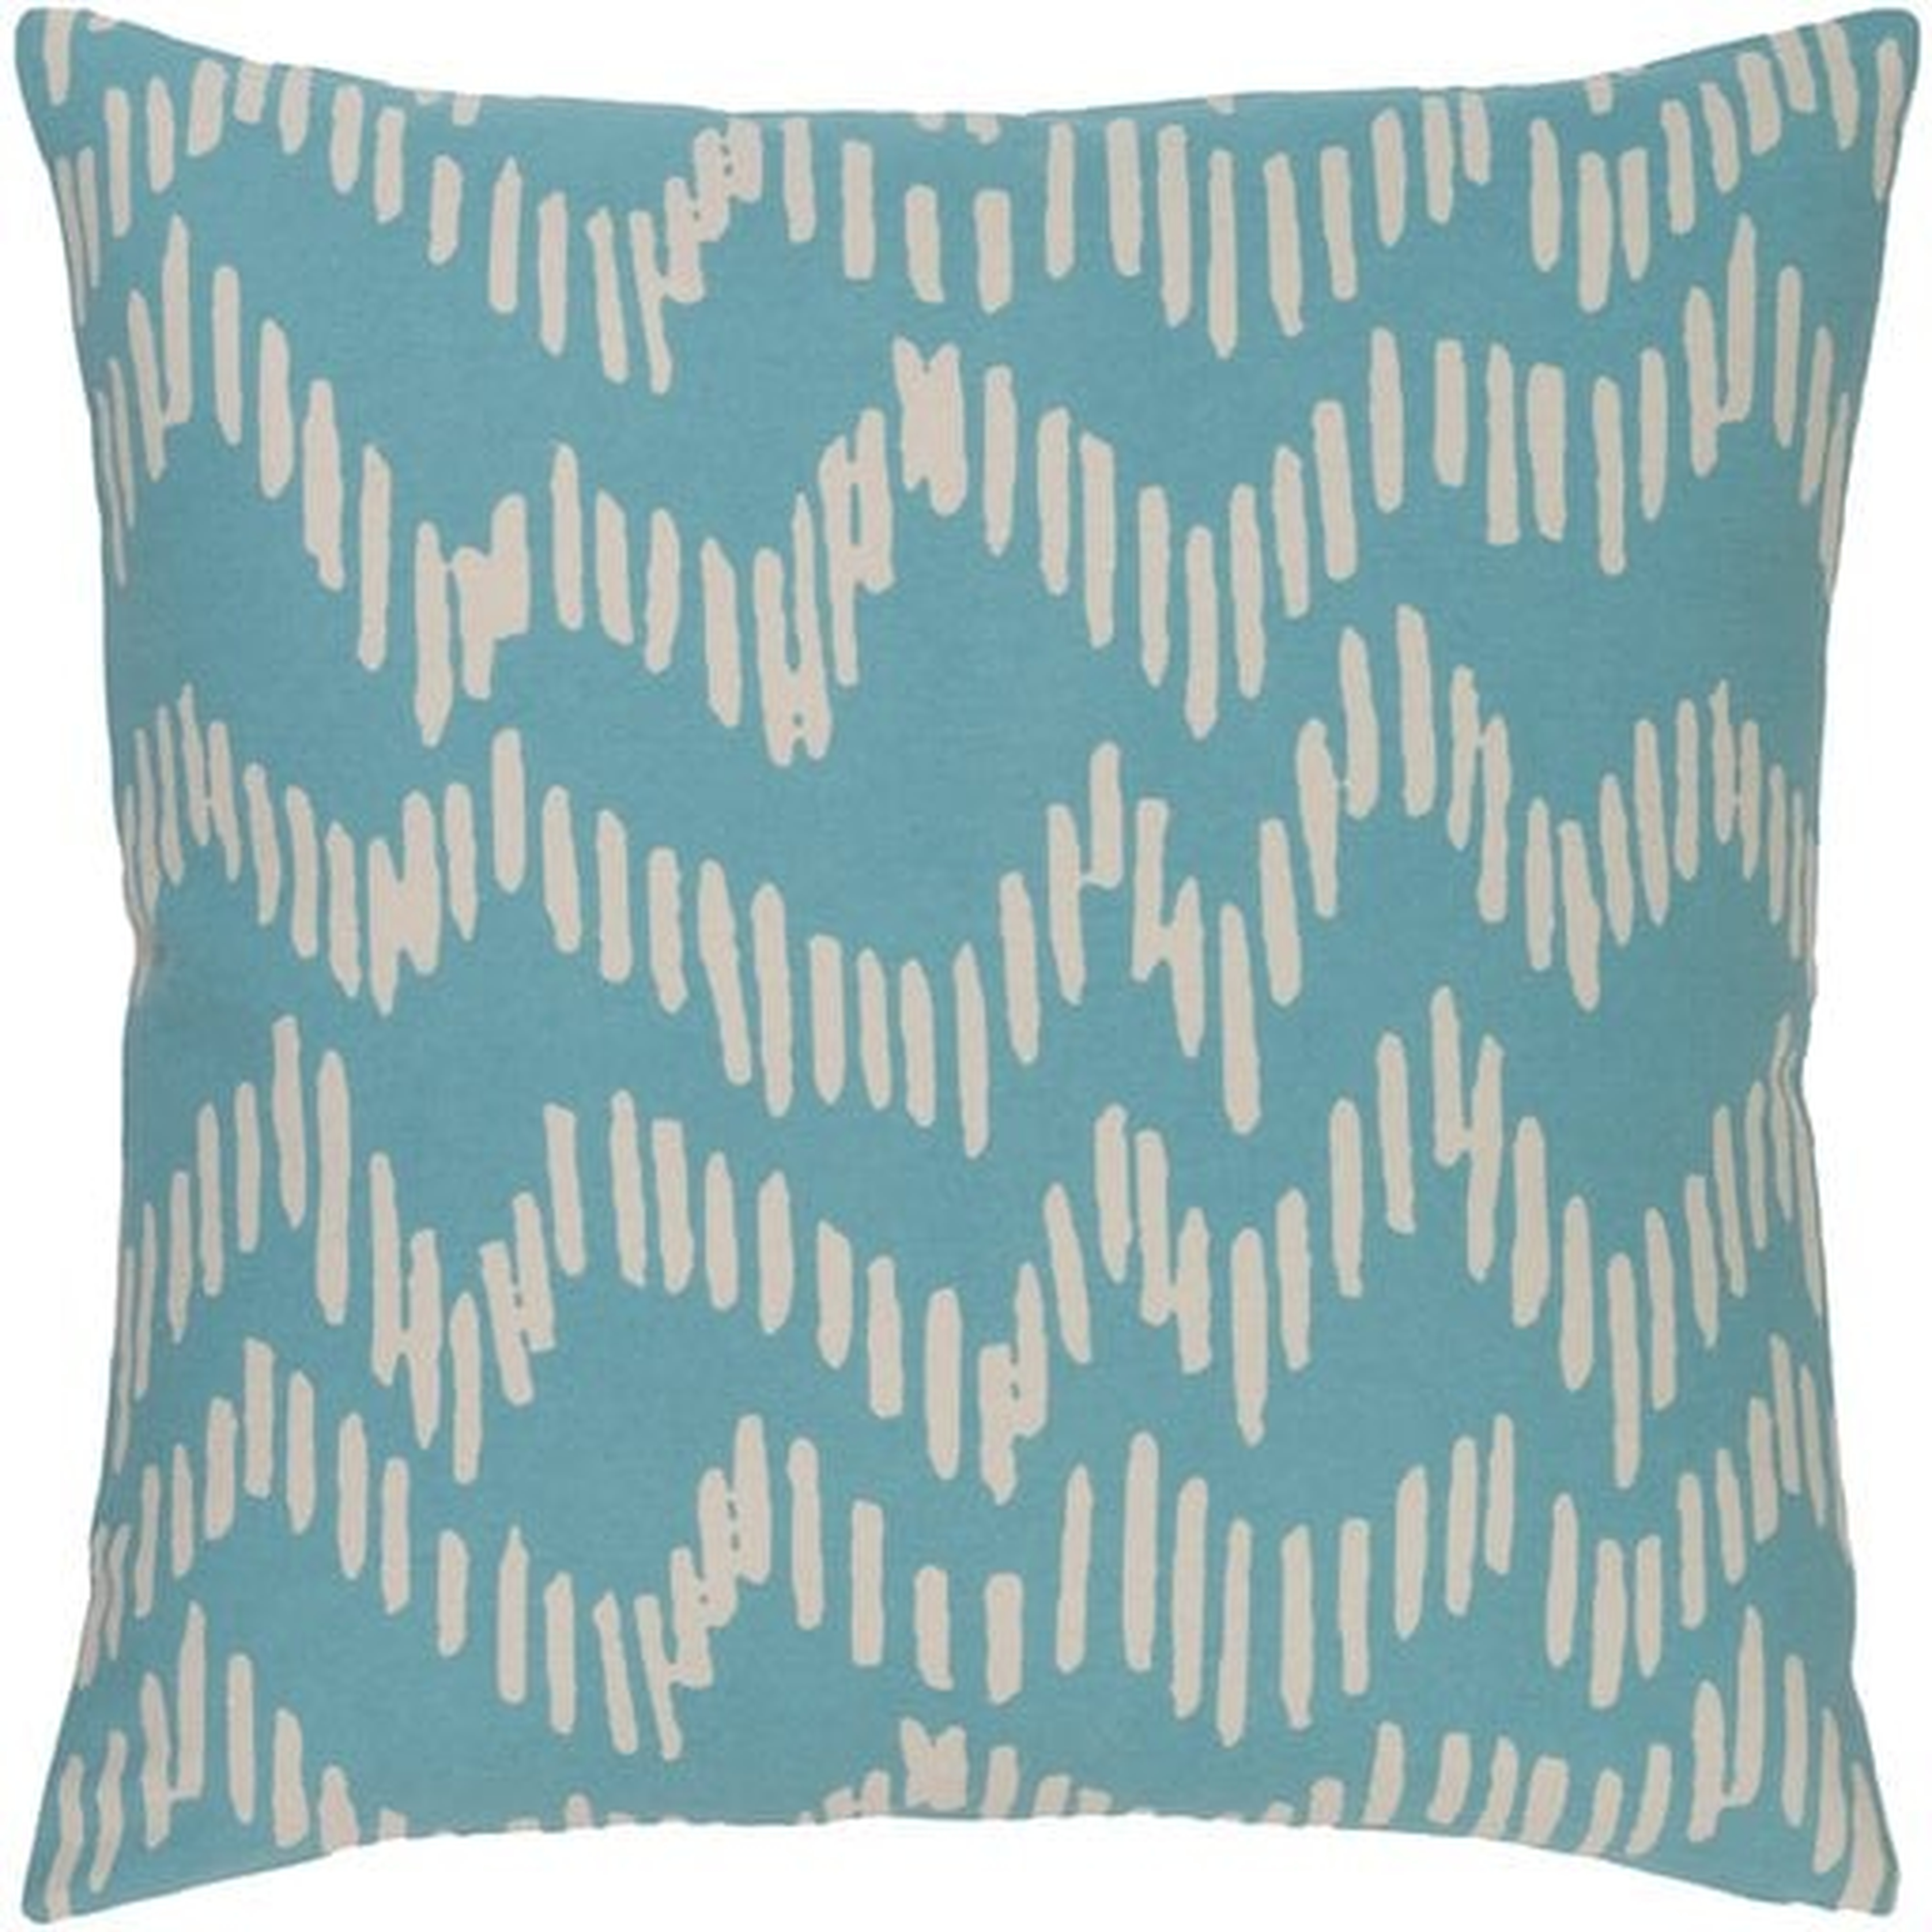 Somerset Throw Pillow, 20" x 20", with poly insert - Surya